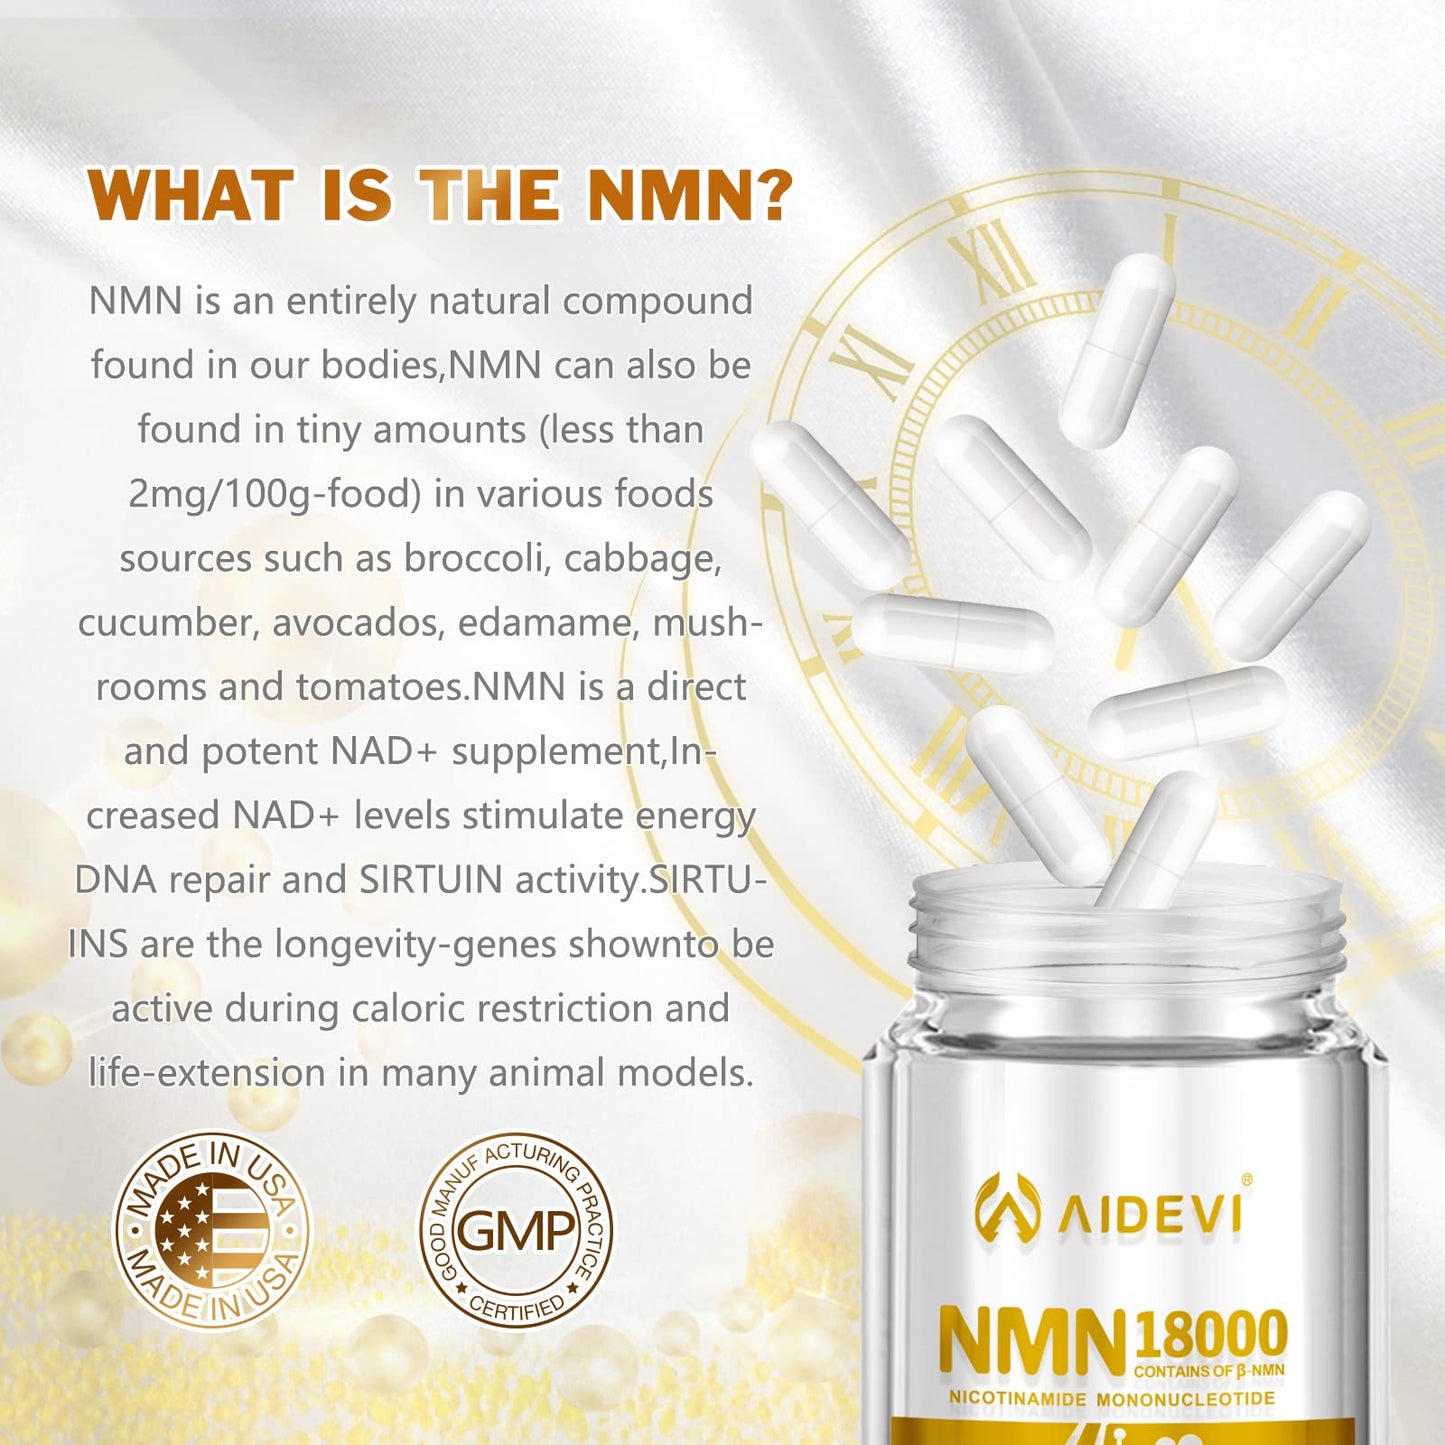 AIDEVI NMN 18000 - NMN Nicotinamide Mononucleotide Supplement with Resveratrol, Stabilized Form & 99% High Purity to Boost NAD+ Levels for DNA Repair Supplement,for Healthy Aging ,60 Capsules